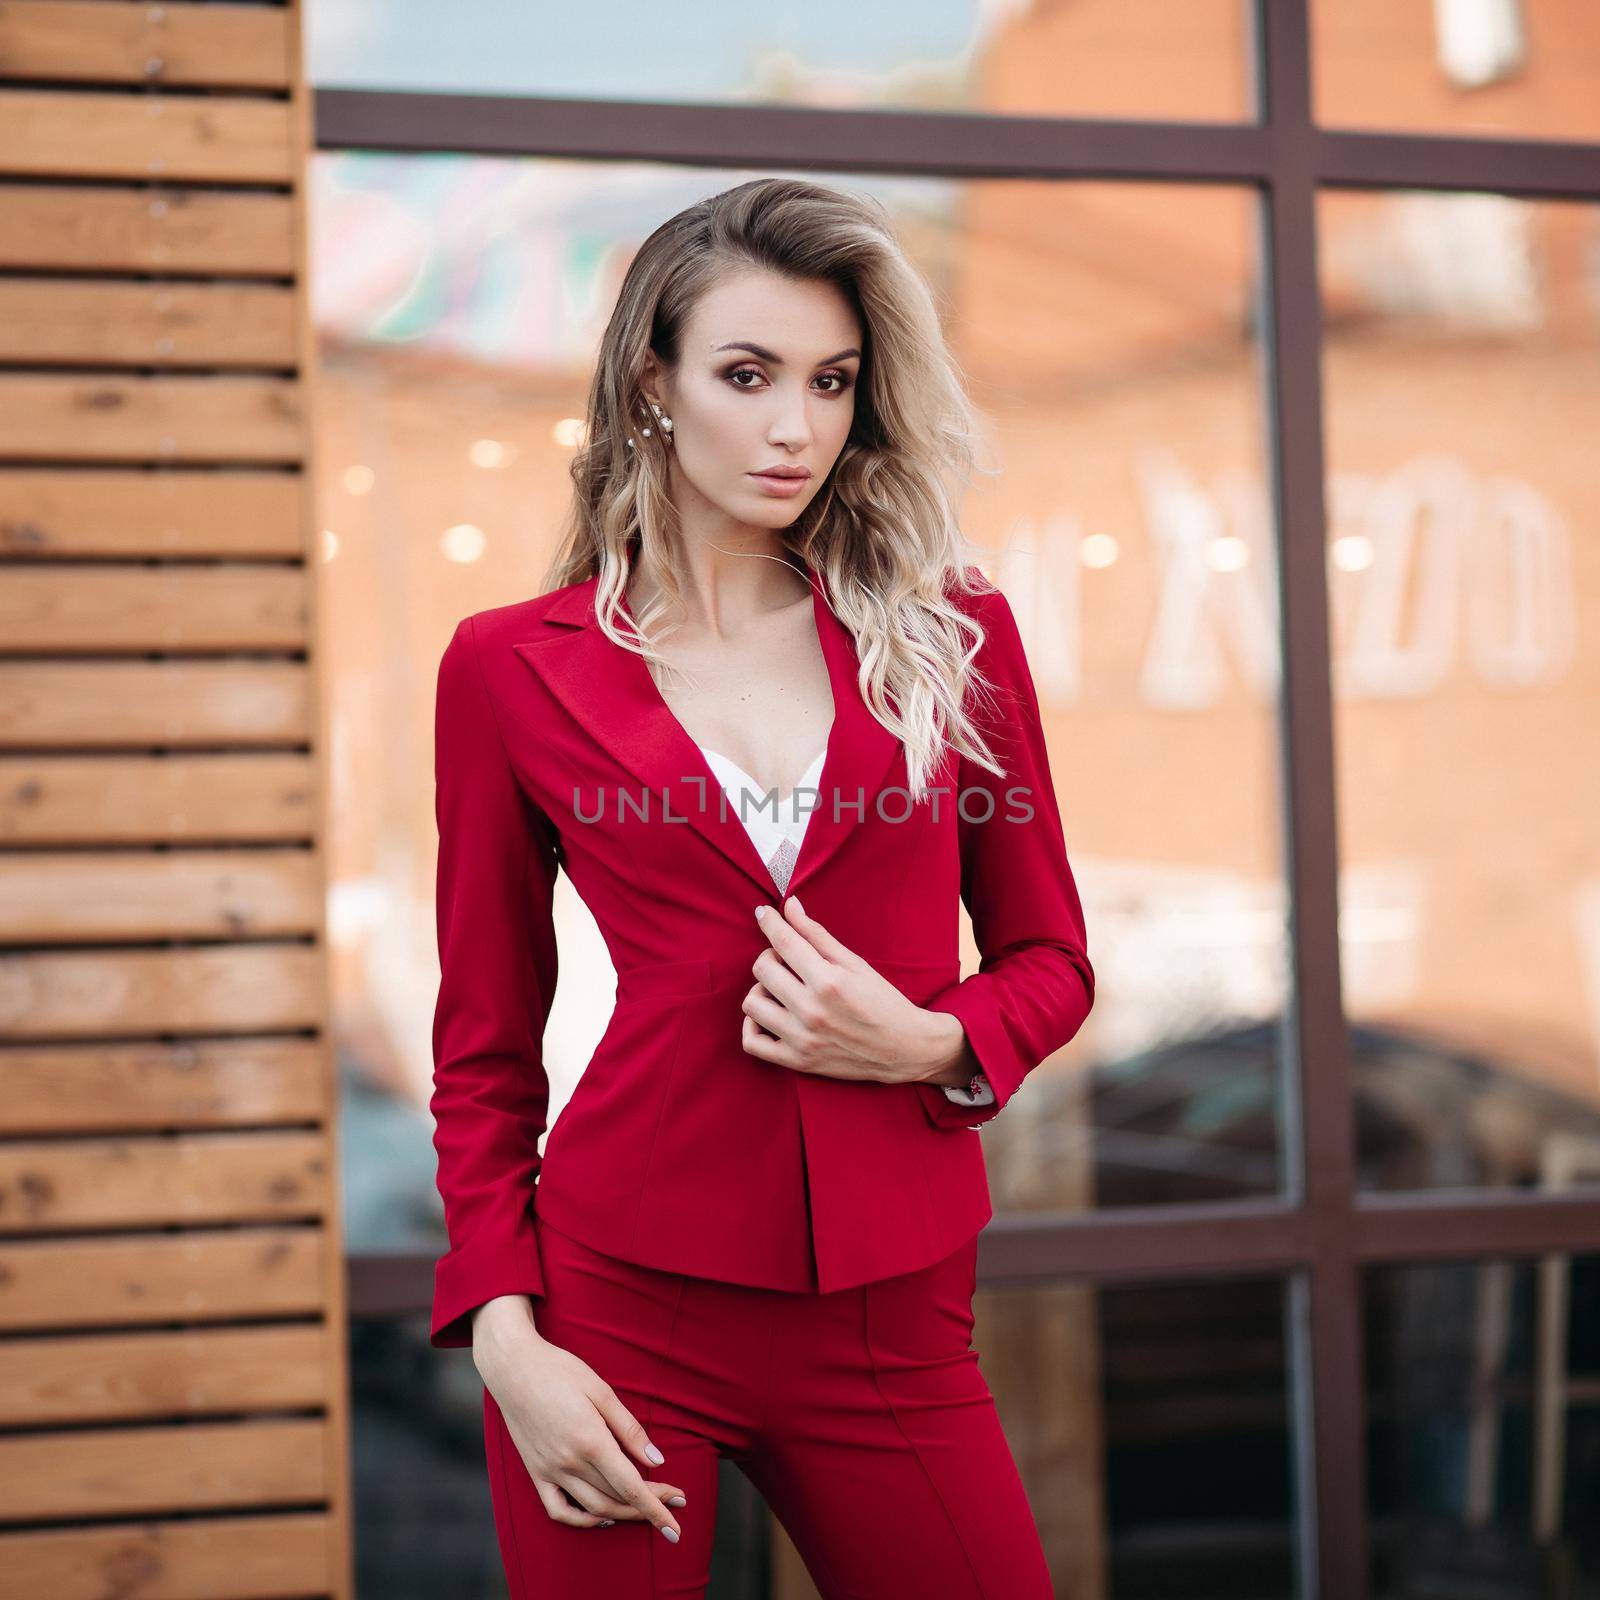 Elegant blonde woman in dark red suit with gold buttons. by StudioLucky